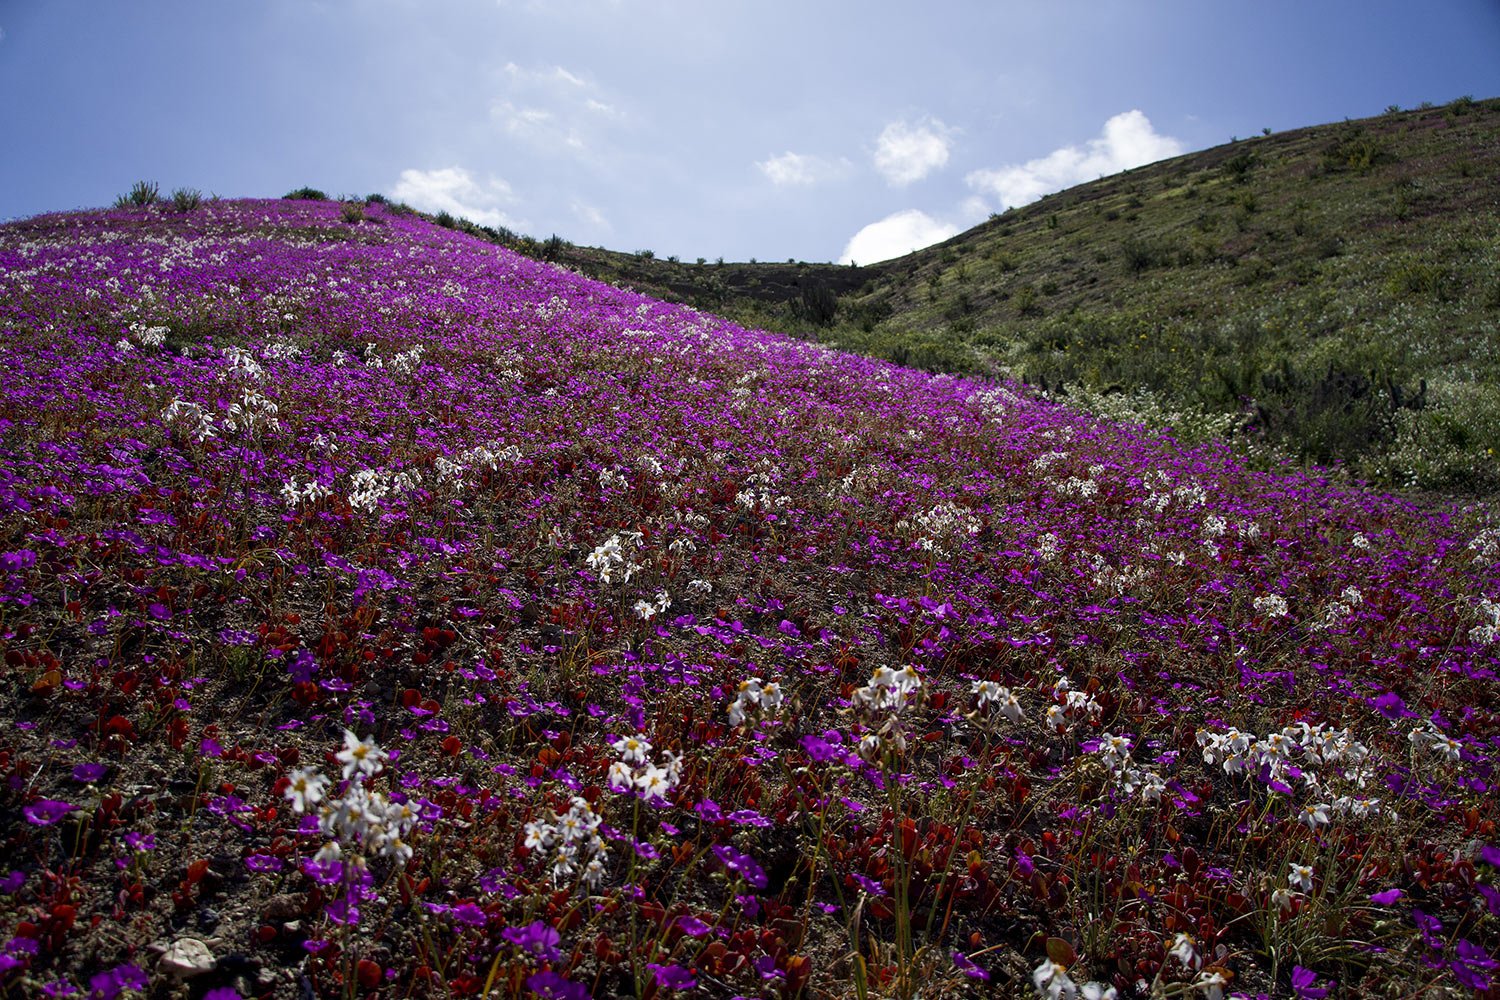  Blooming flowers cover the Atacama desert near Copiapo, Chile, Tuesday, Oct. 4, 2022. The phenomenon typically only happens every five to seven years when rare heavy rains cause flowers to bloom. (AP Photo/Matias Basualdo) 